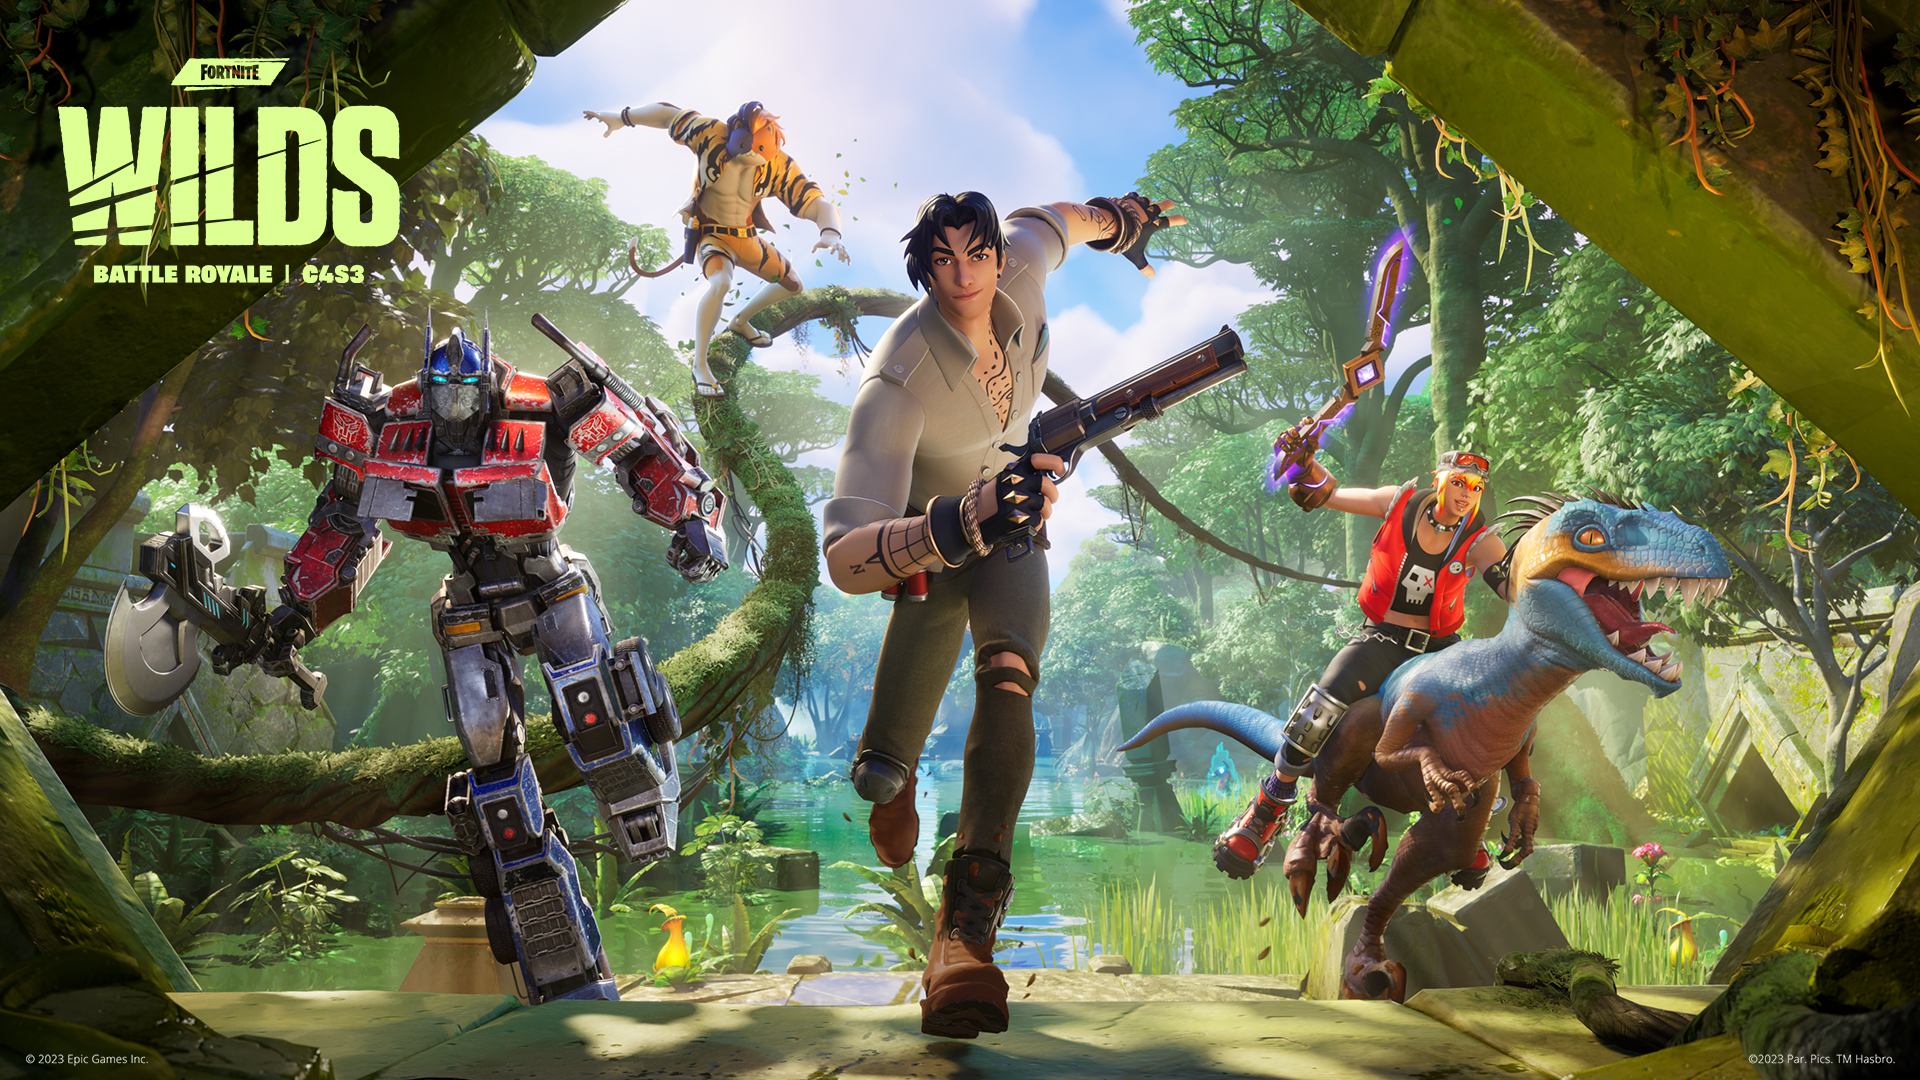 Fortnite Wilds key art, featuring several of the battle pass characters, including Optimus Prime and Purradise Meowscles